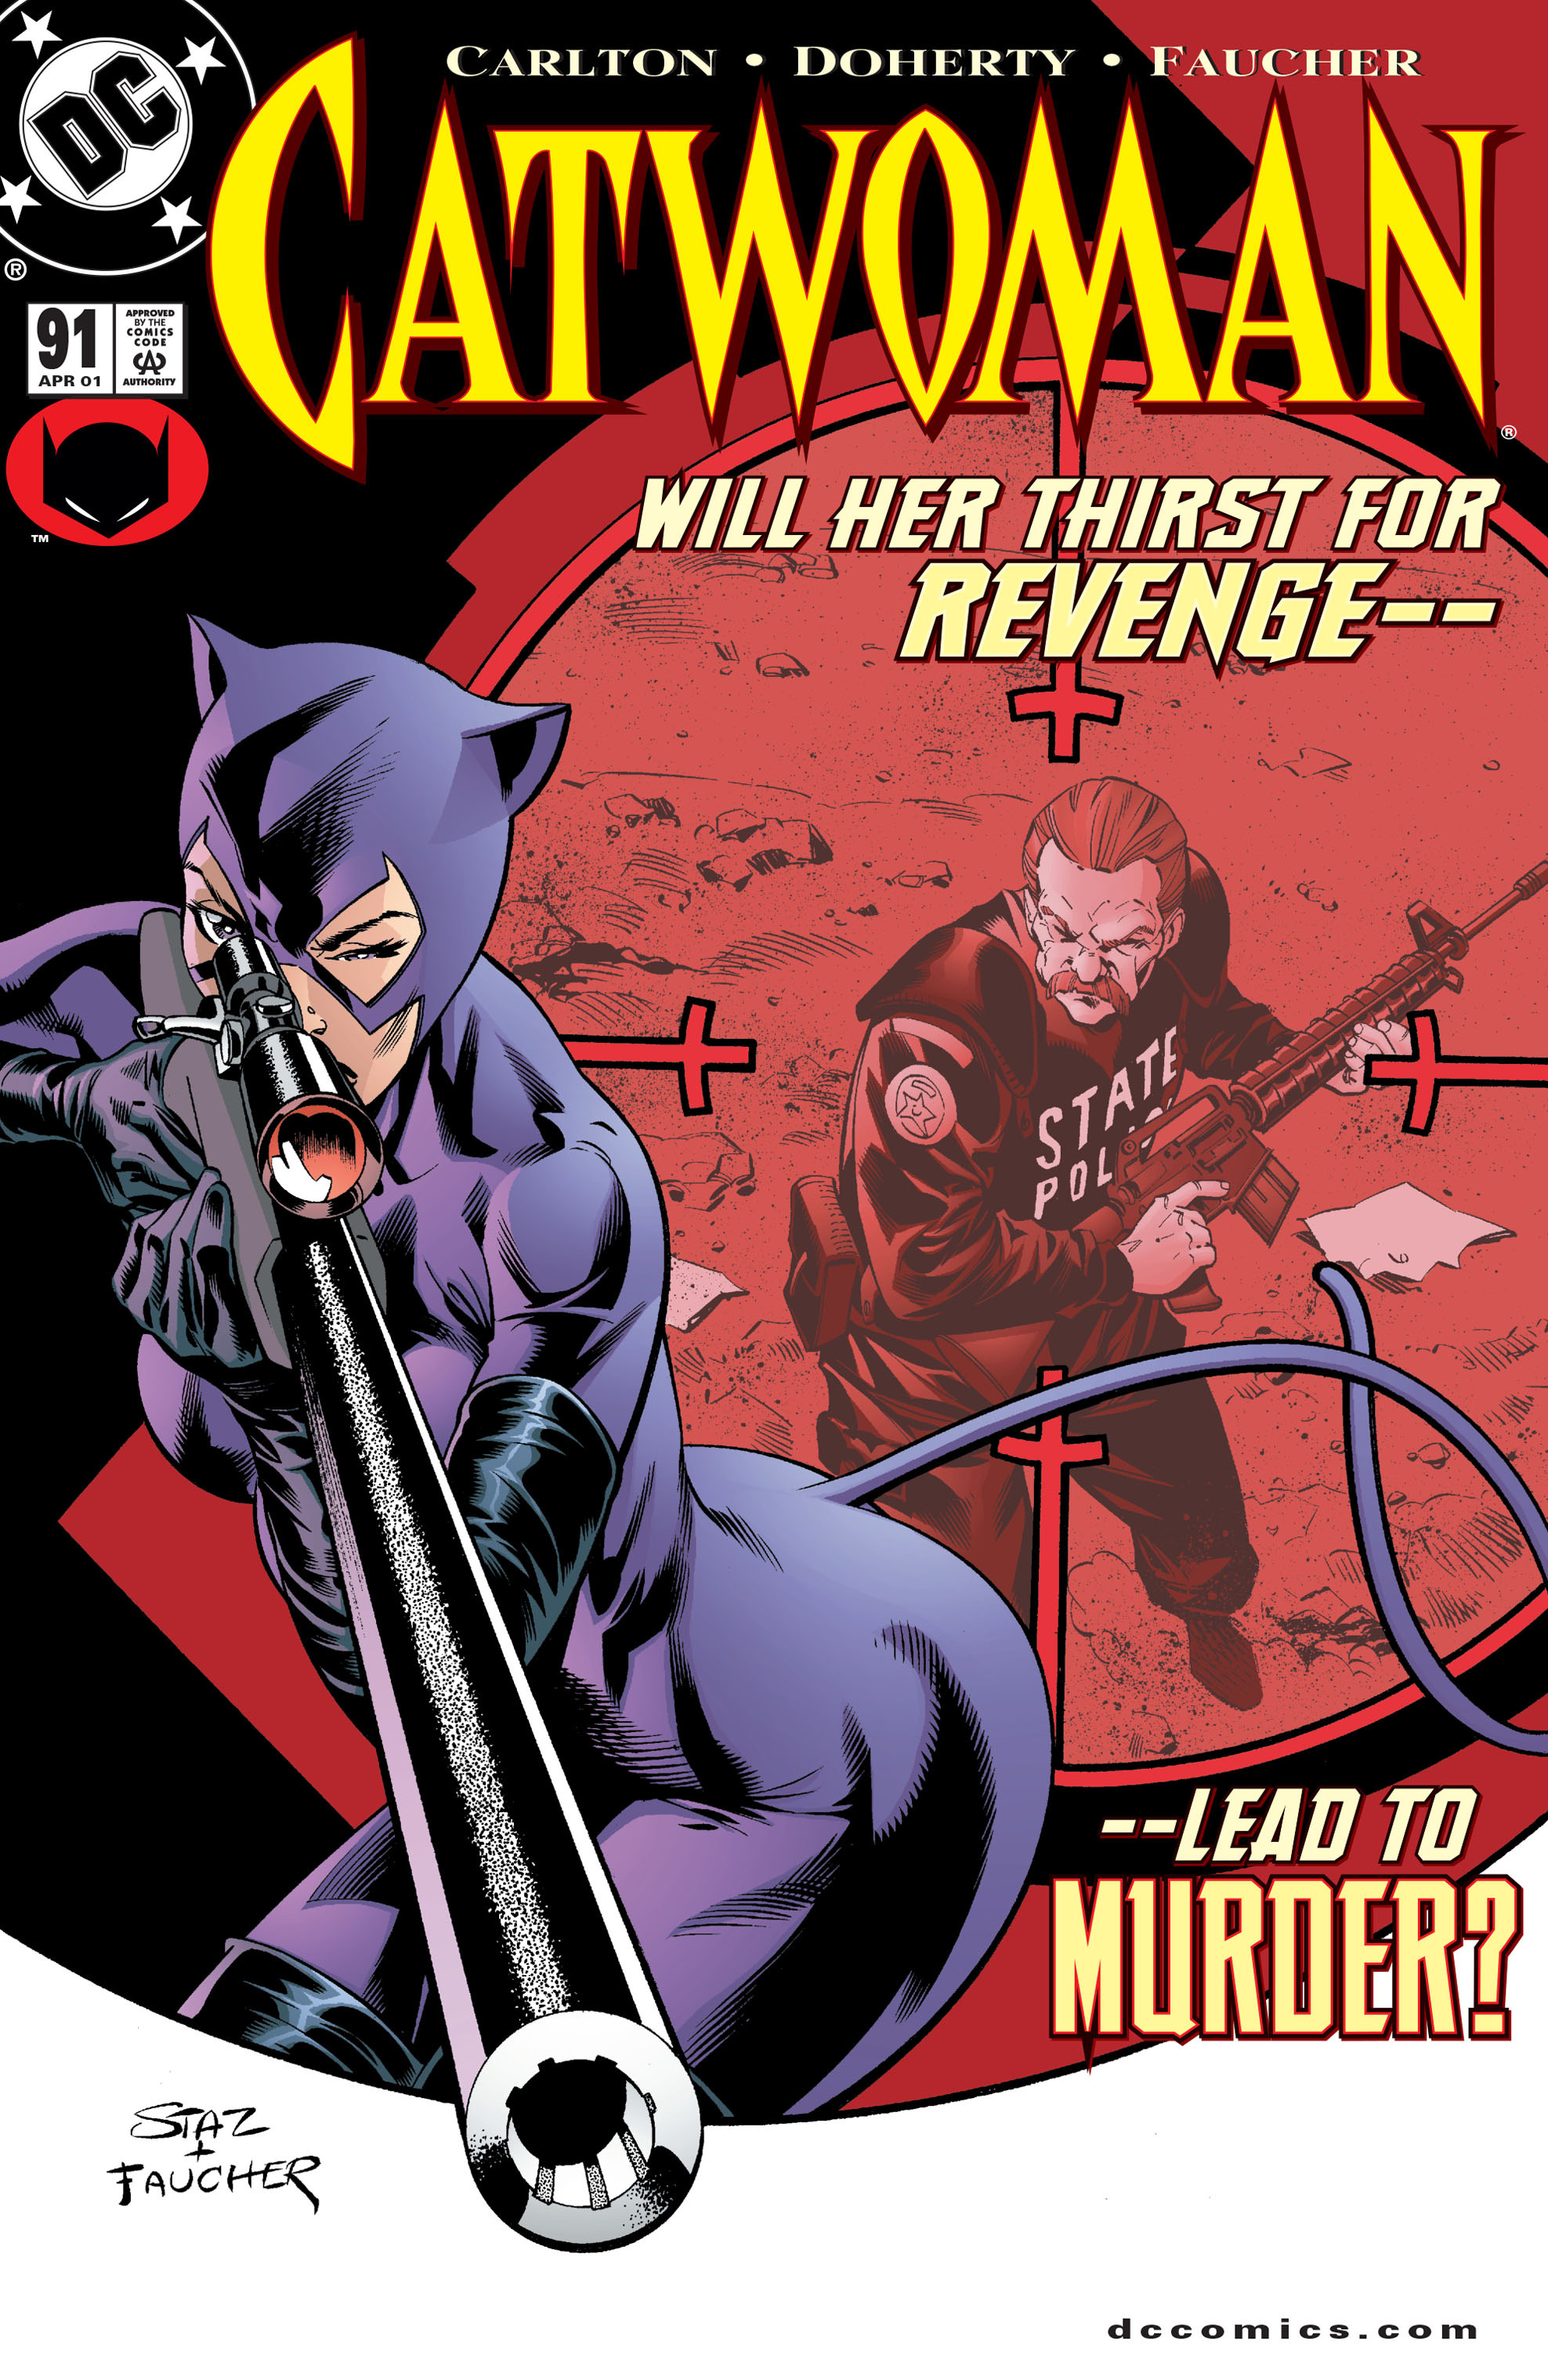 Read online Catwoman (1993) comic -  Issue #91 - 1